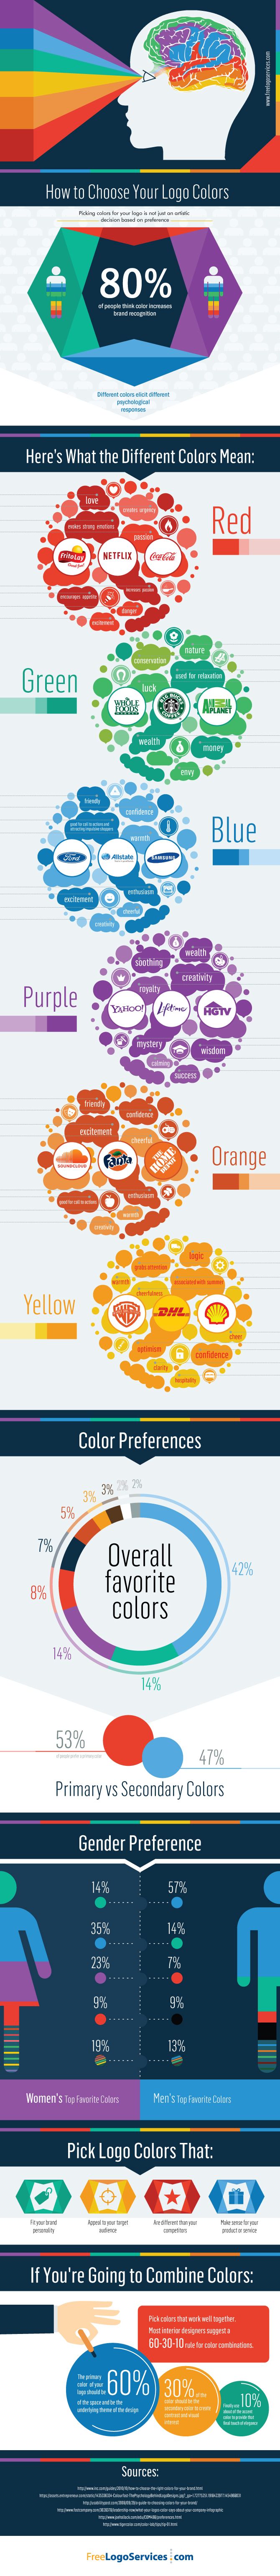 Psychology-Infographic-How-to-Choose-Your-Logo-Colors-Infographic Psychology Infographic : How to Choose Your Logo Colors #Infographic #Business #Colors #Logo #HowTo